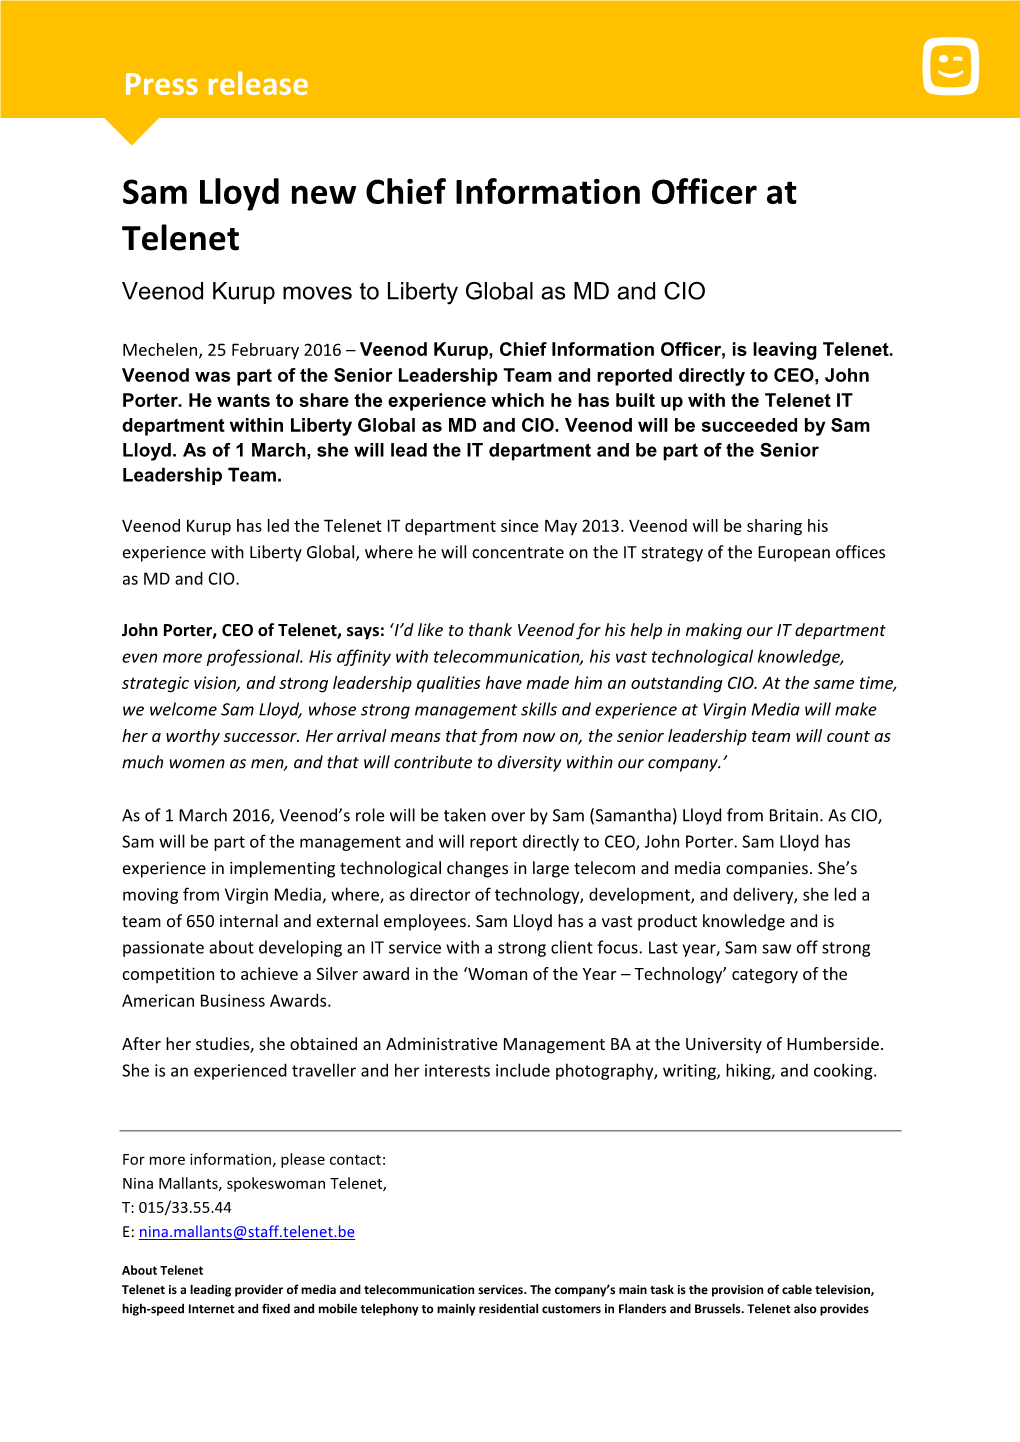 Sam Lloyd New Chief Information Officer at Telenet Veenod Kurup Moves to Liberty Global As MD and CIO